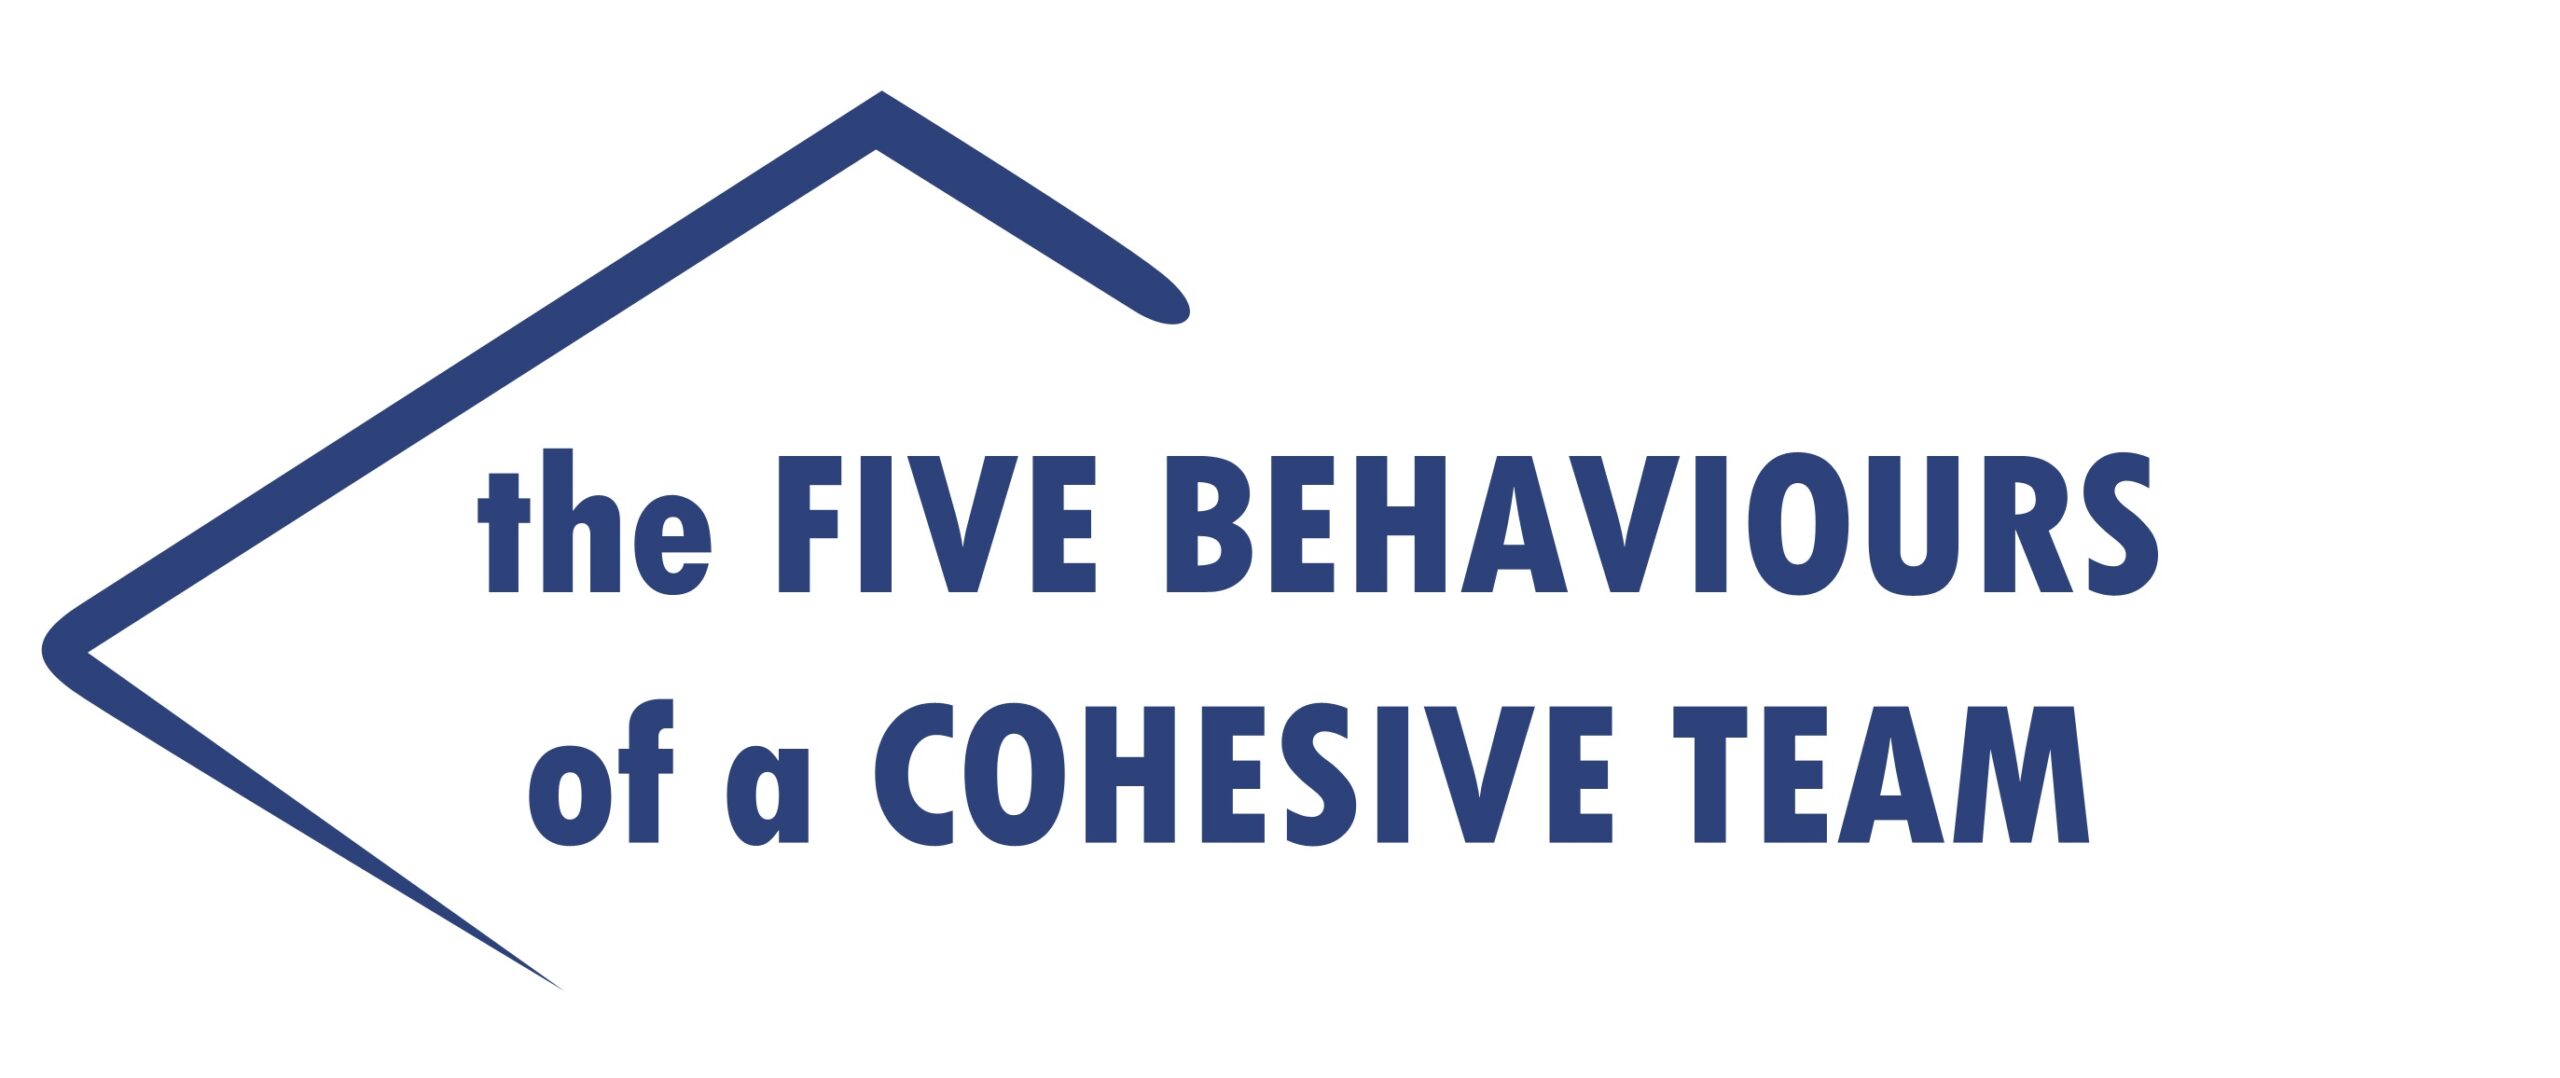 The Five Behaviours of a Cohesive Team Class